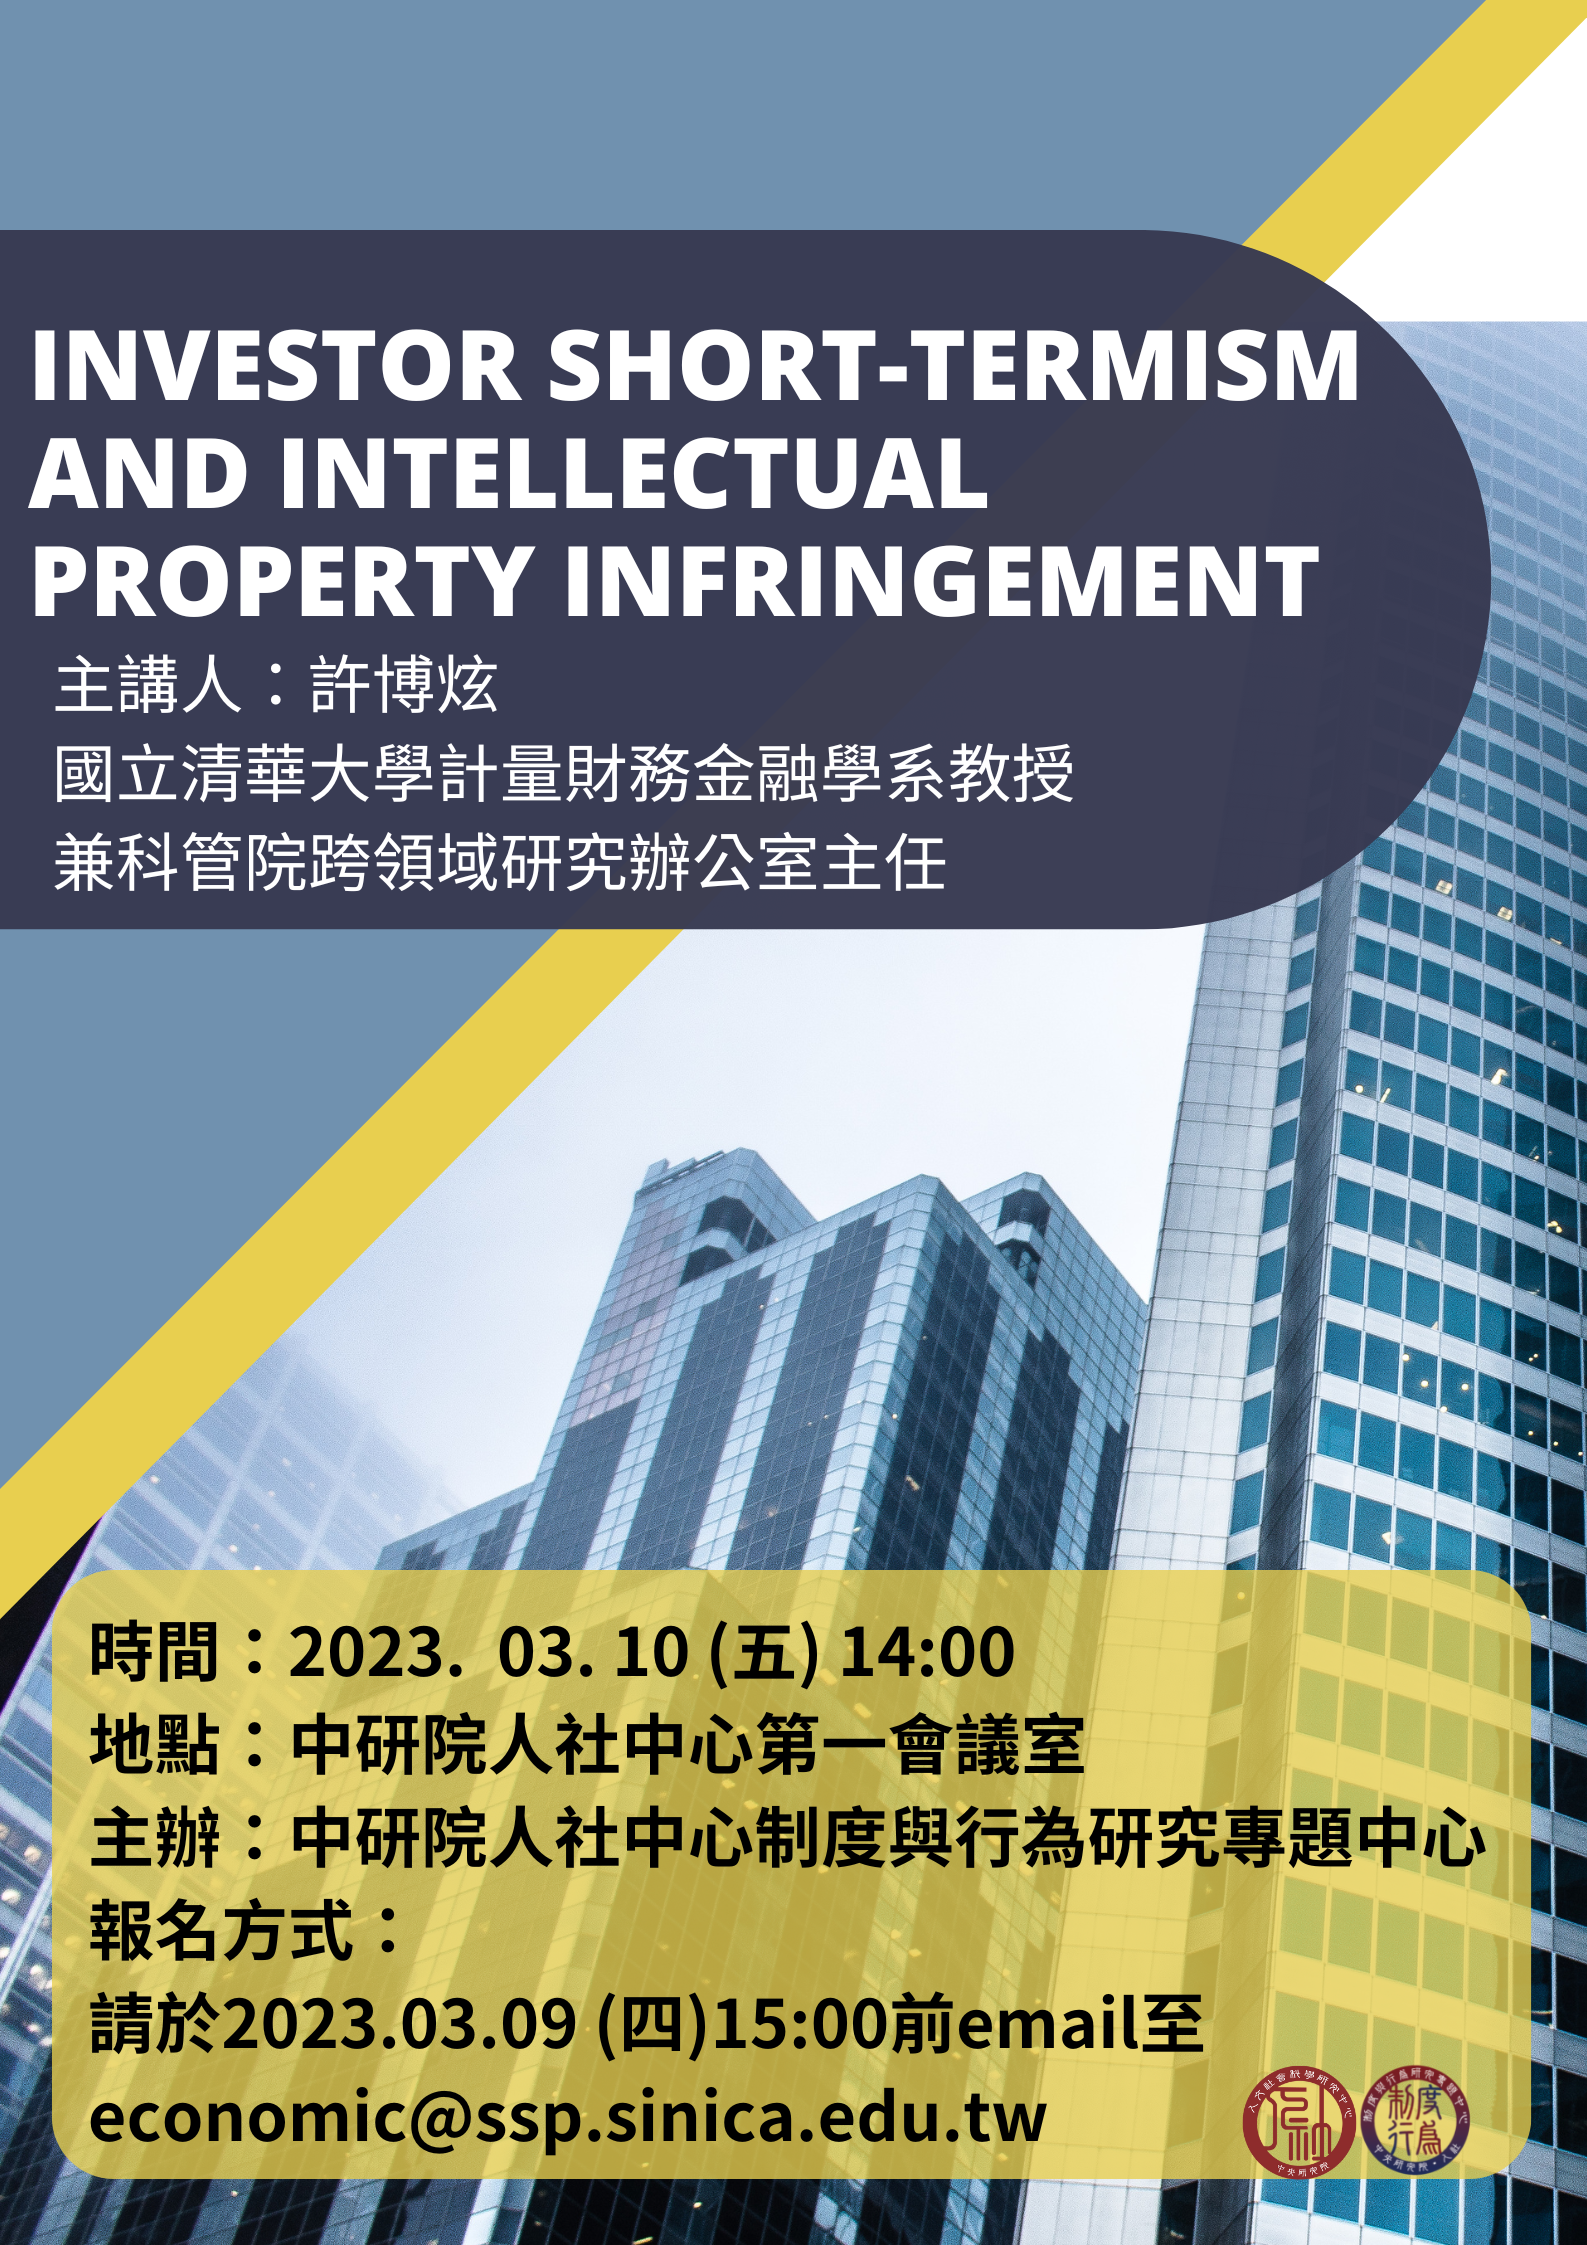 Investor Short-termism and Intellectual Property Infringement